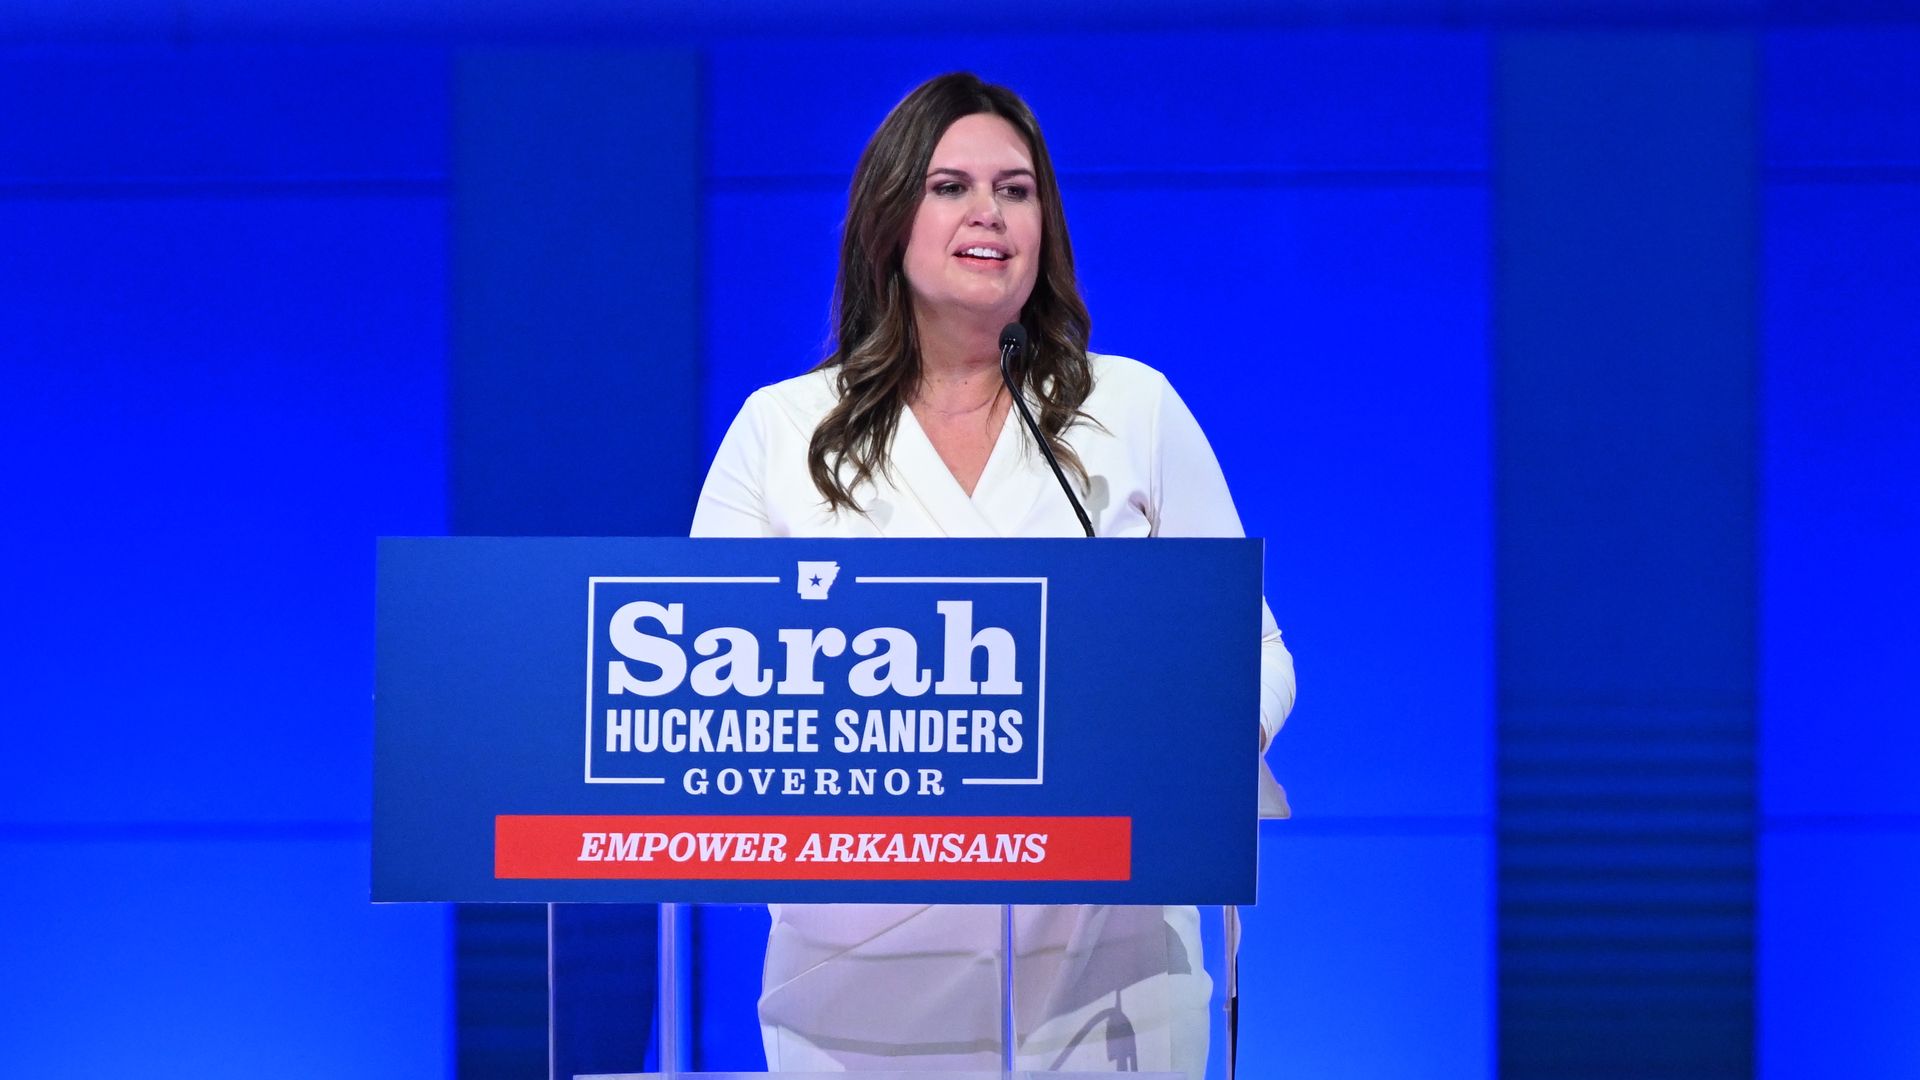 A photo of Gov. Sarah Huckabee Sanders in a white dress on a blue field giving her acceptance speech after winning the election, standing at a podium.